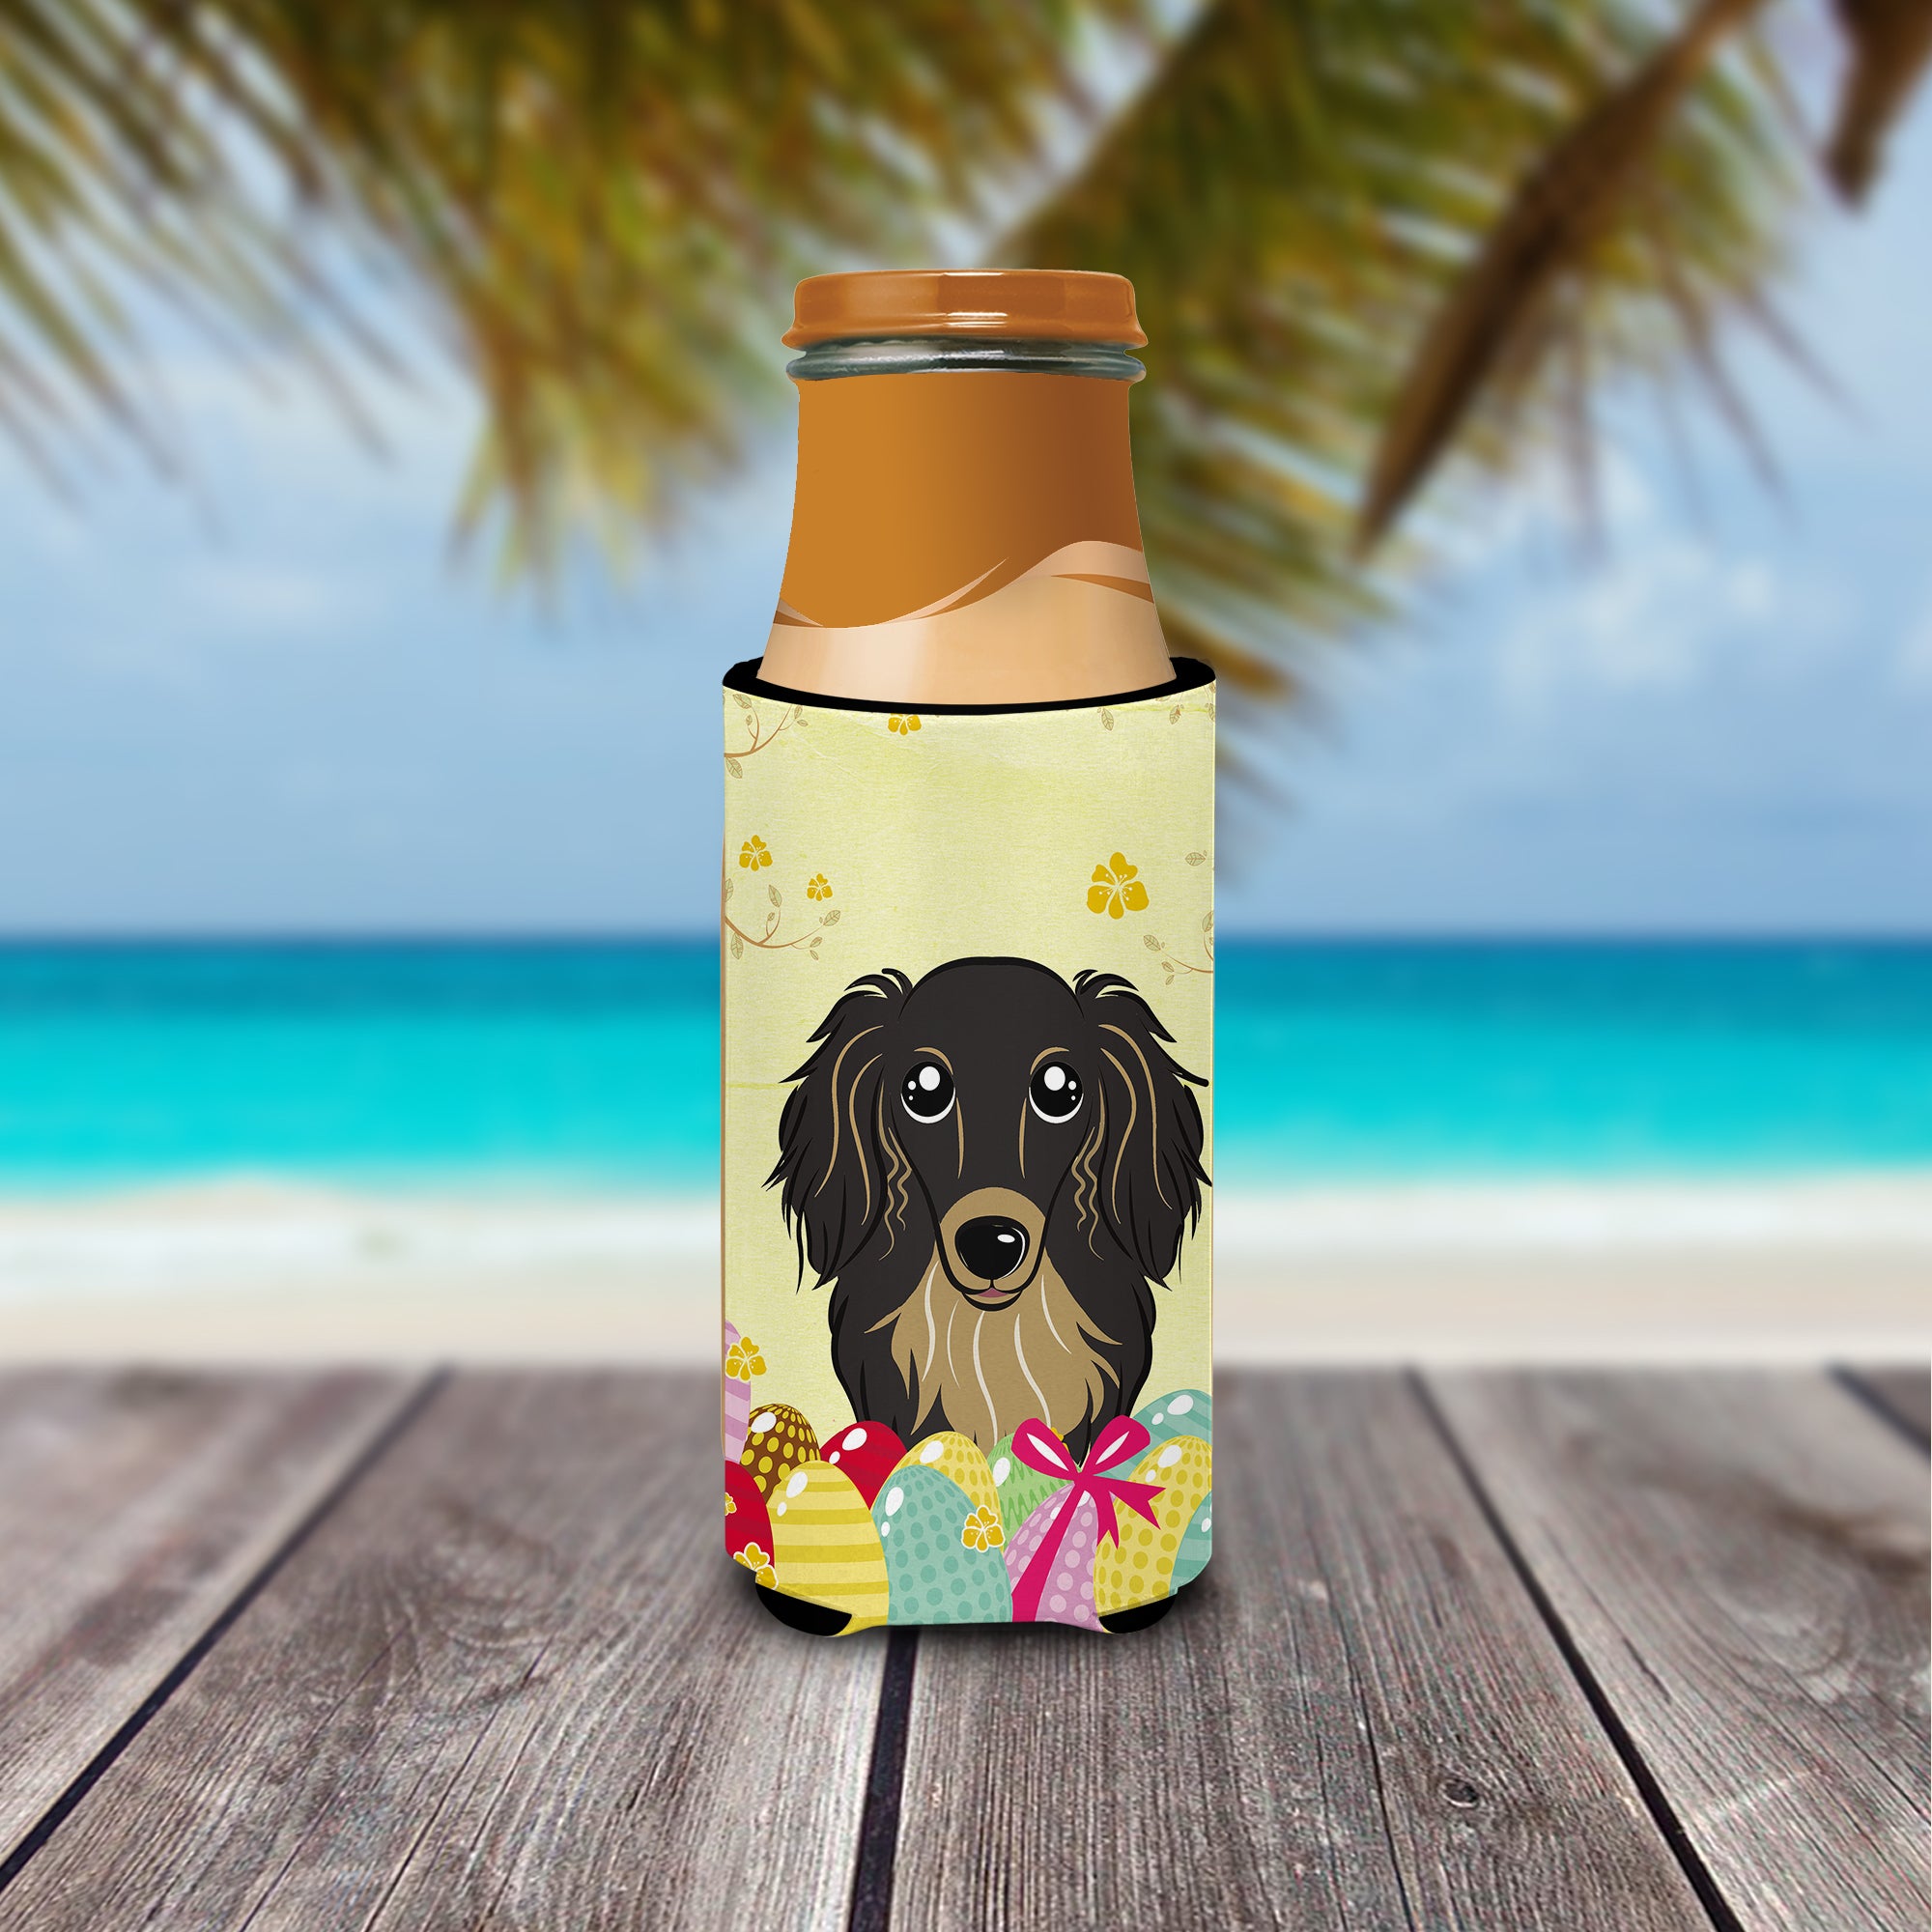 Longhair Black and Tan Dachshund Easter Egg Hunt  Ultra Beverage Insulator for slim cans BB1895MUK  the-store.com.